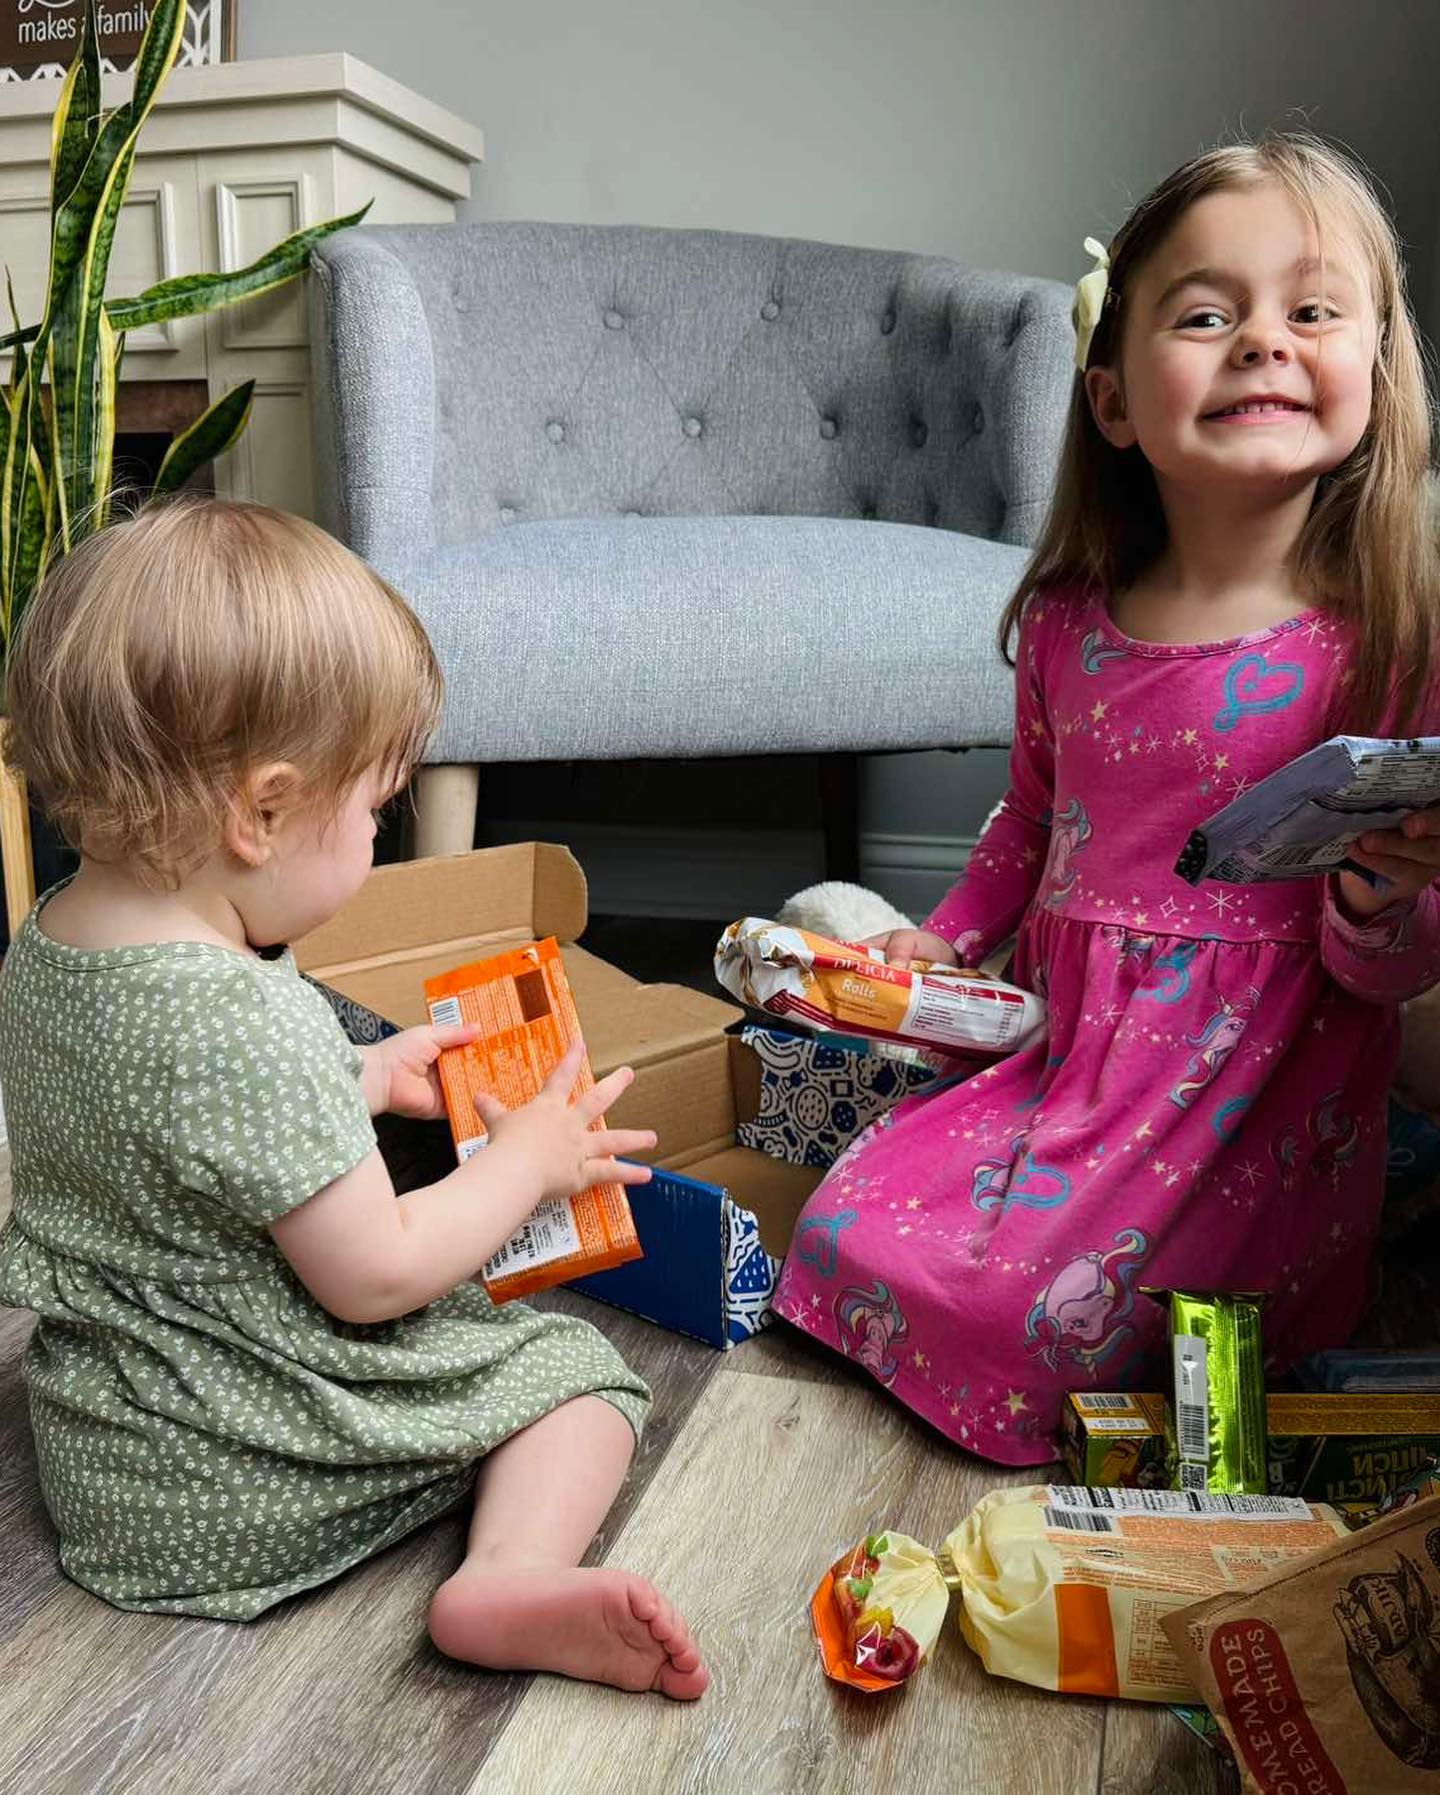 Two young girls sitting on the floor, playing with snack bars and packages, with a grey armchair and a plant in the background.